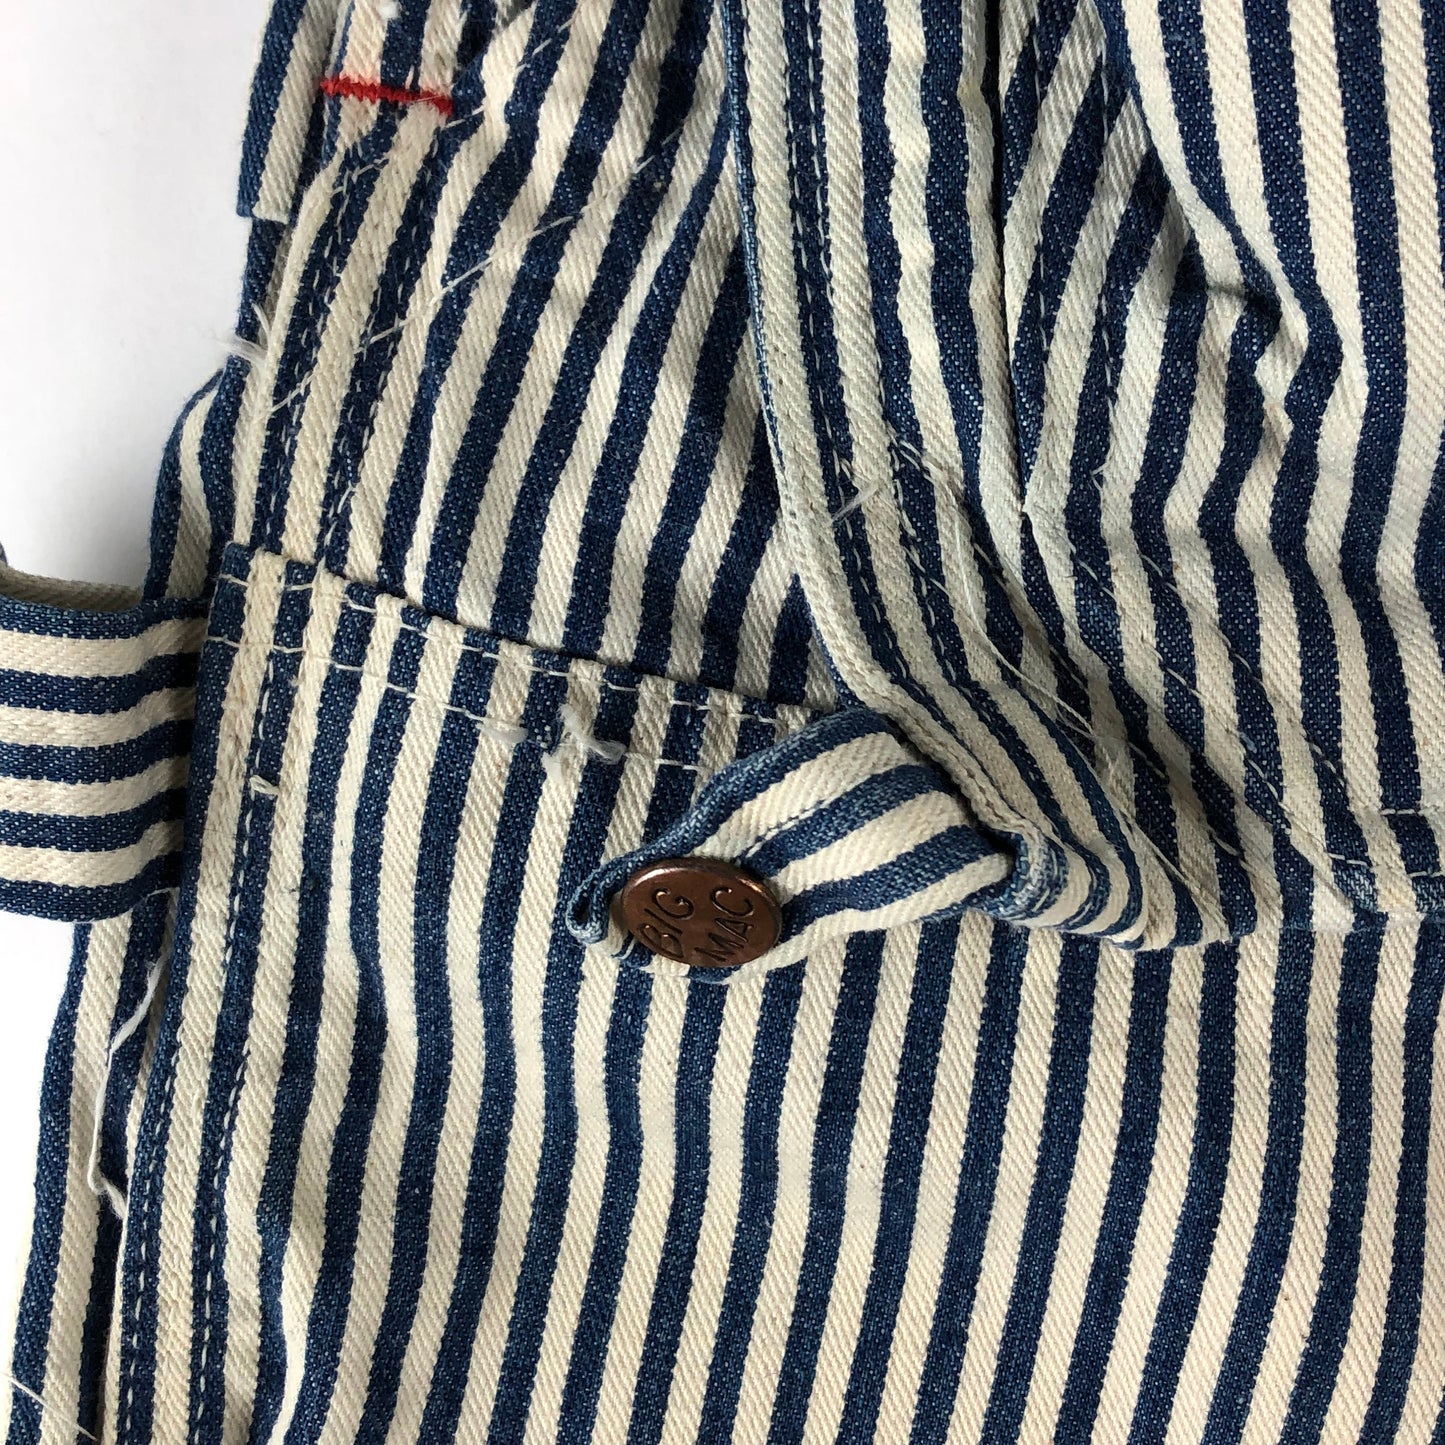 1960s/1970s JC Penney Big Mac Striped Bib Overalls with Tool Pouch Made in USA 33x29